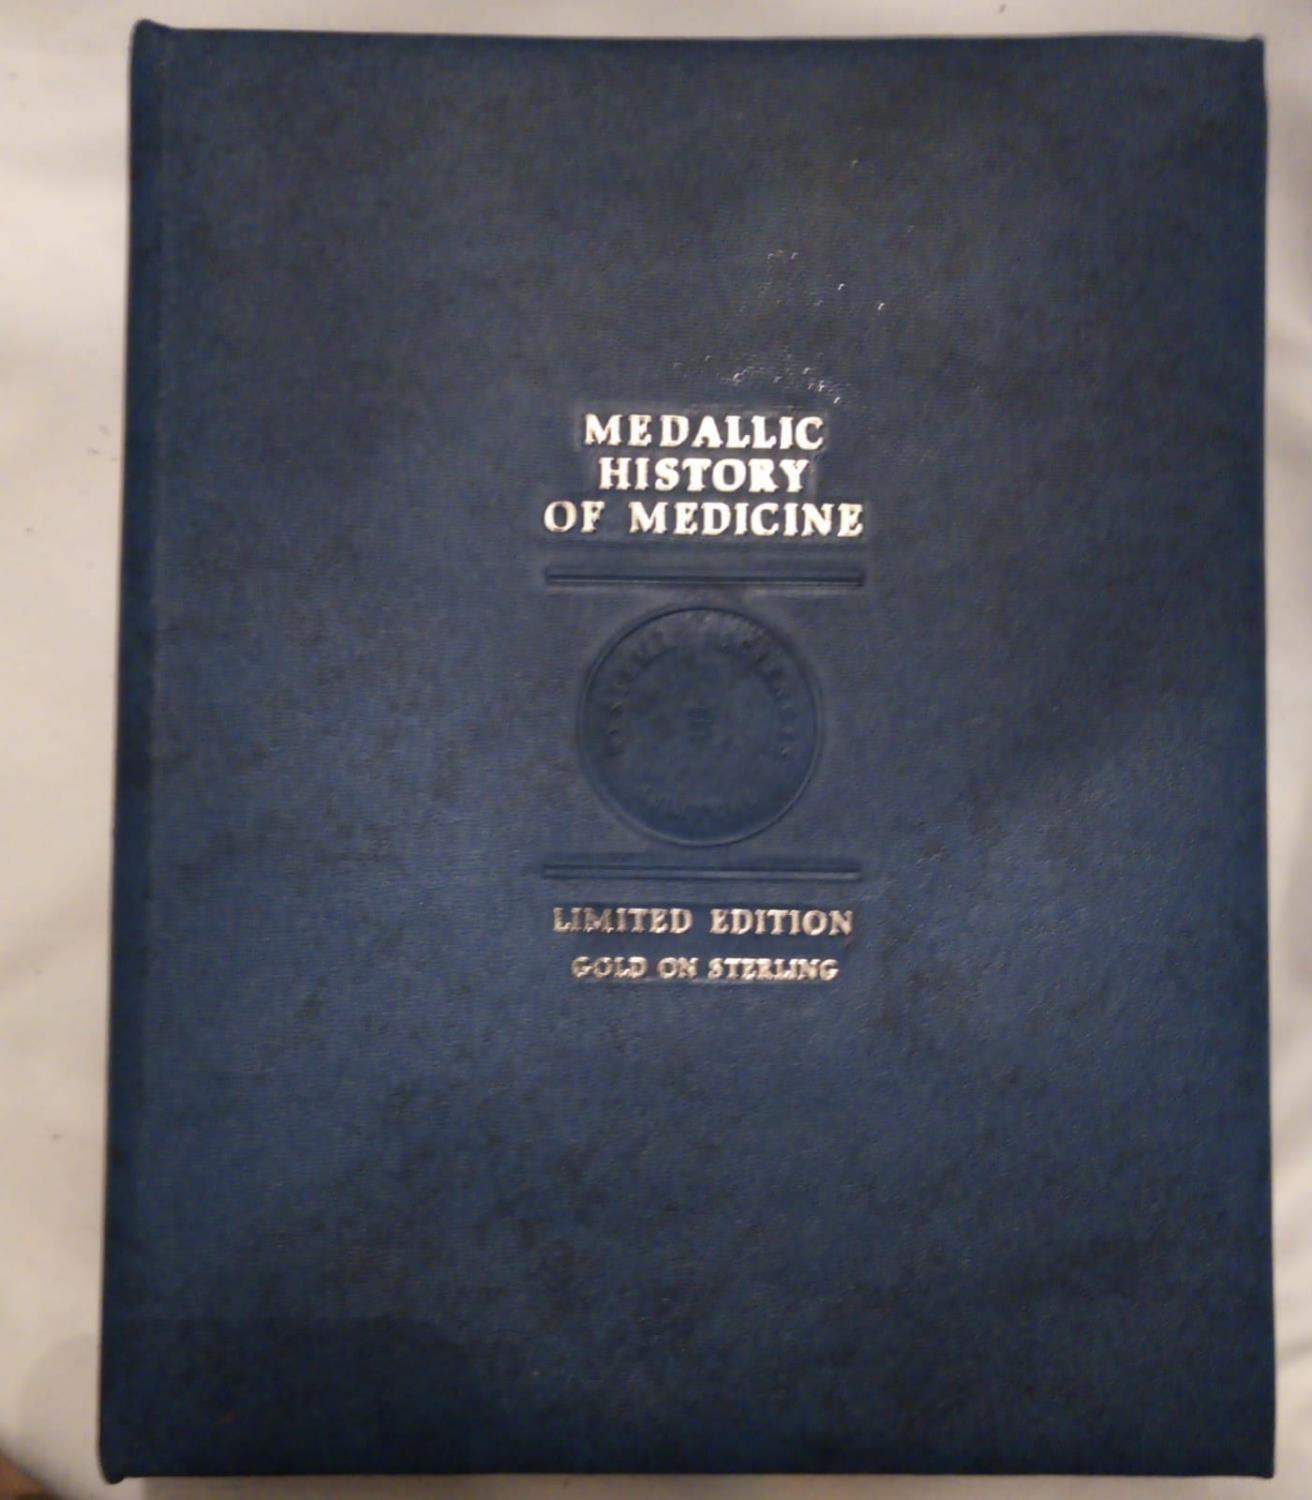 A 24CT GOLD ON SILVER MEDALLIC HISTORY OF MEDICINE PROOF COIN SET Complete sixty-six coins in - Image 3 of 3